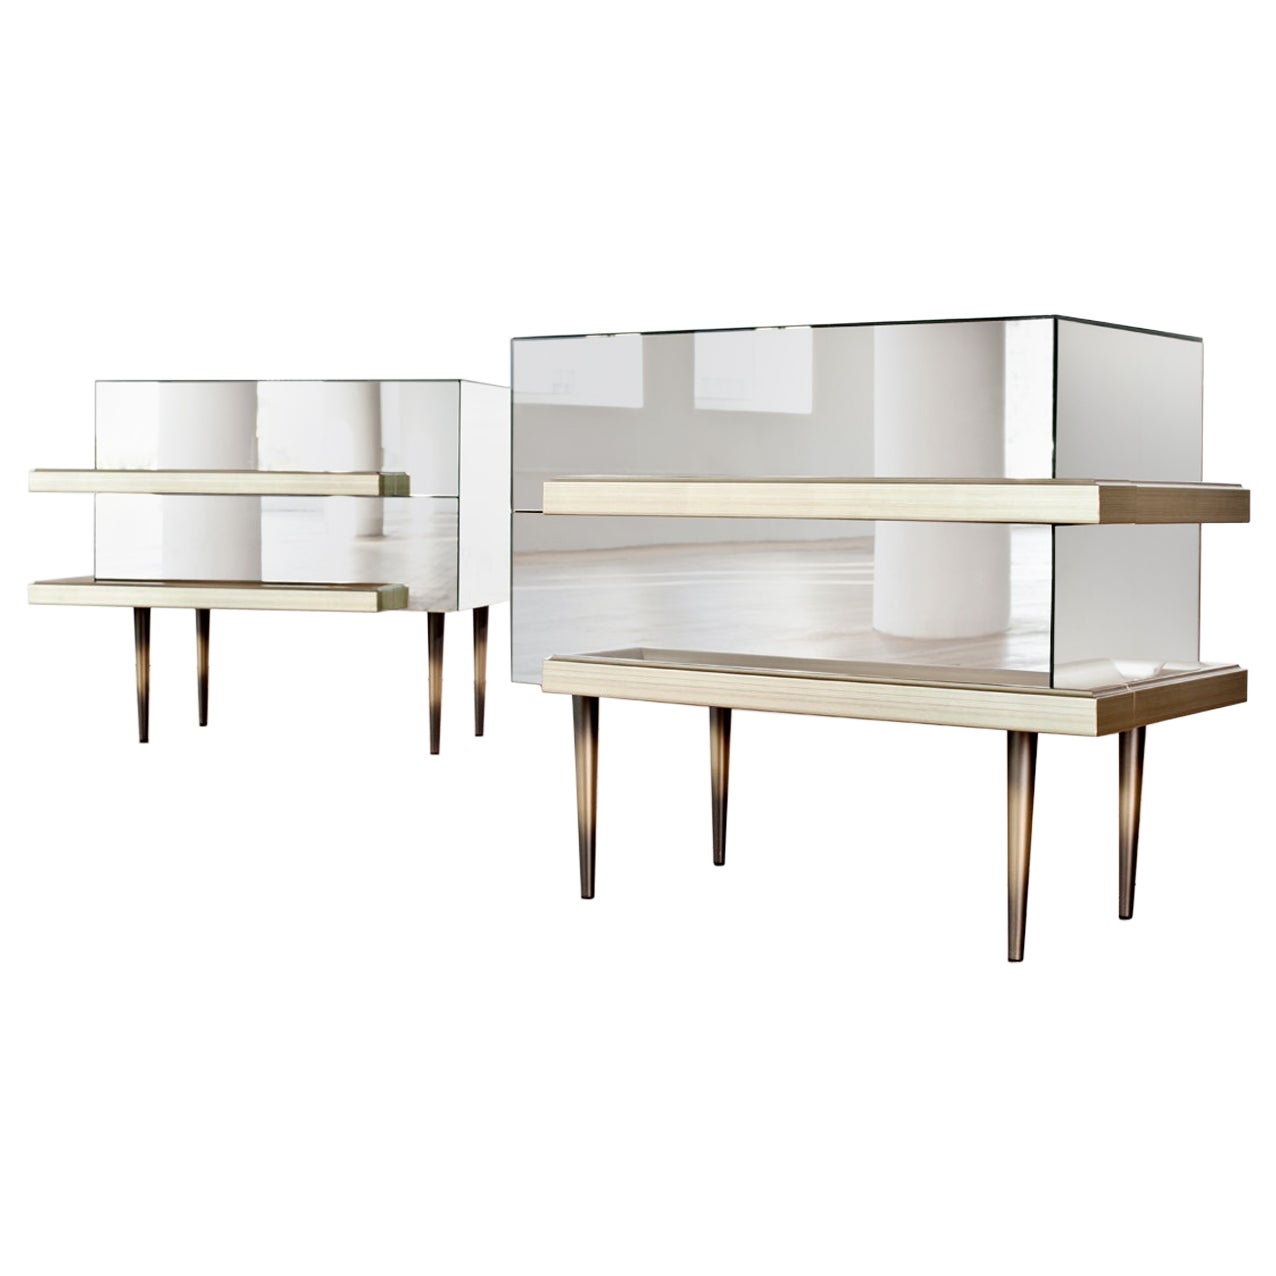 Illusion Set of 2 Nightstands Mirror by Luis Pons